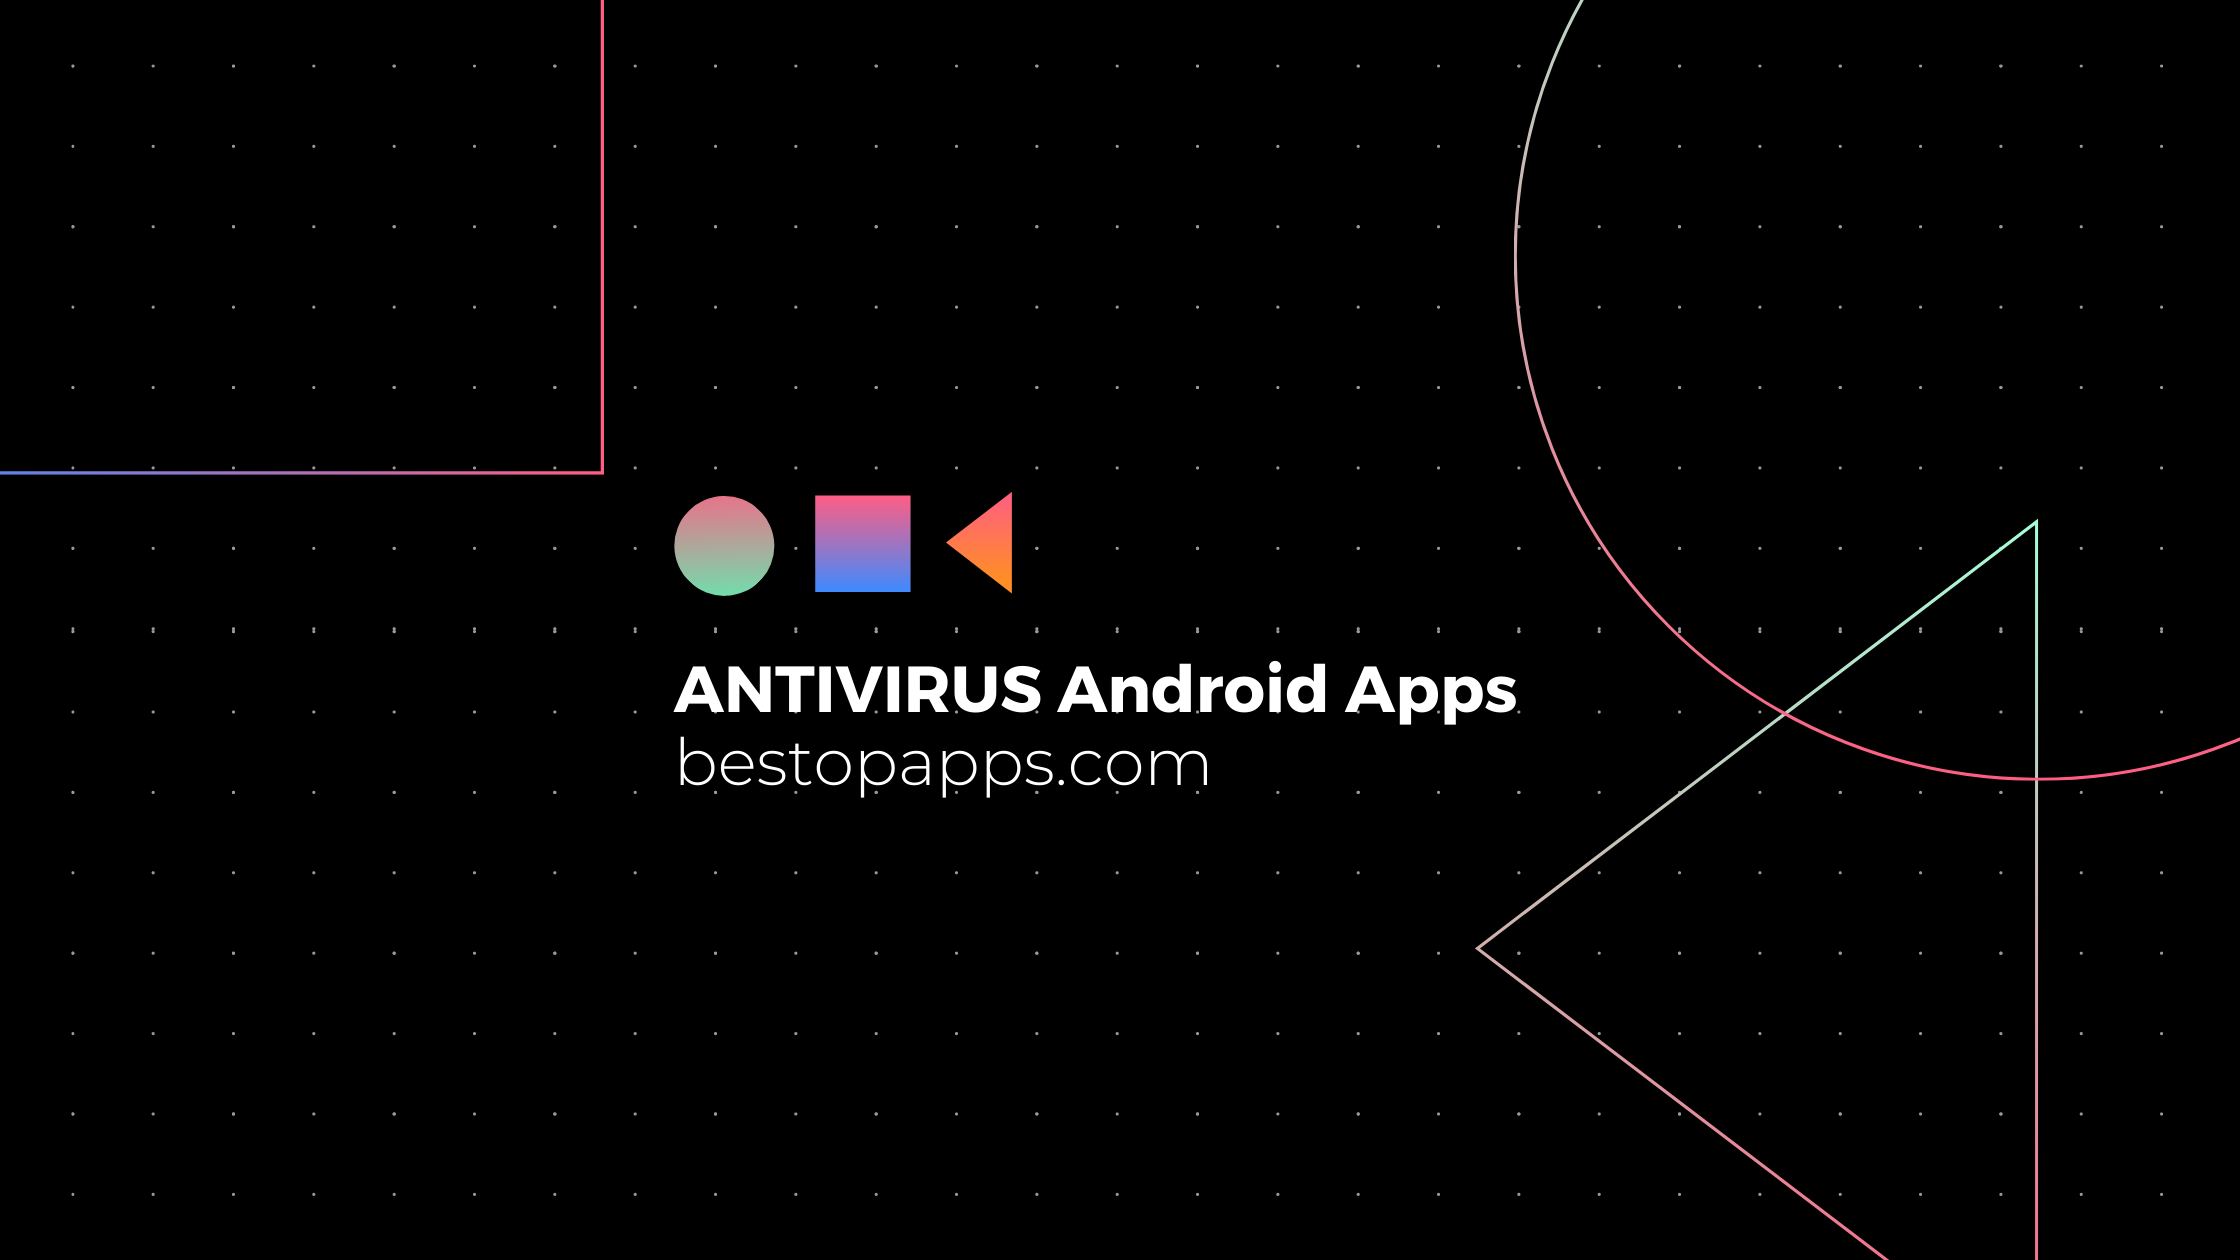 ANTIVIRUS Android Apps